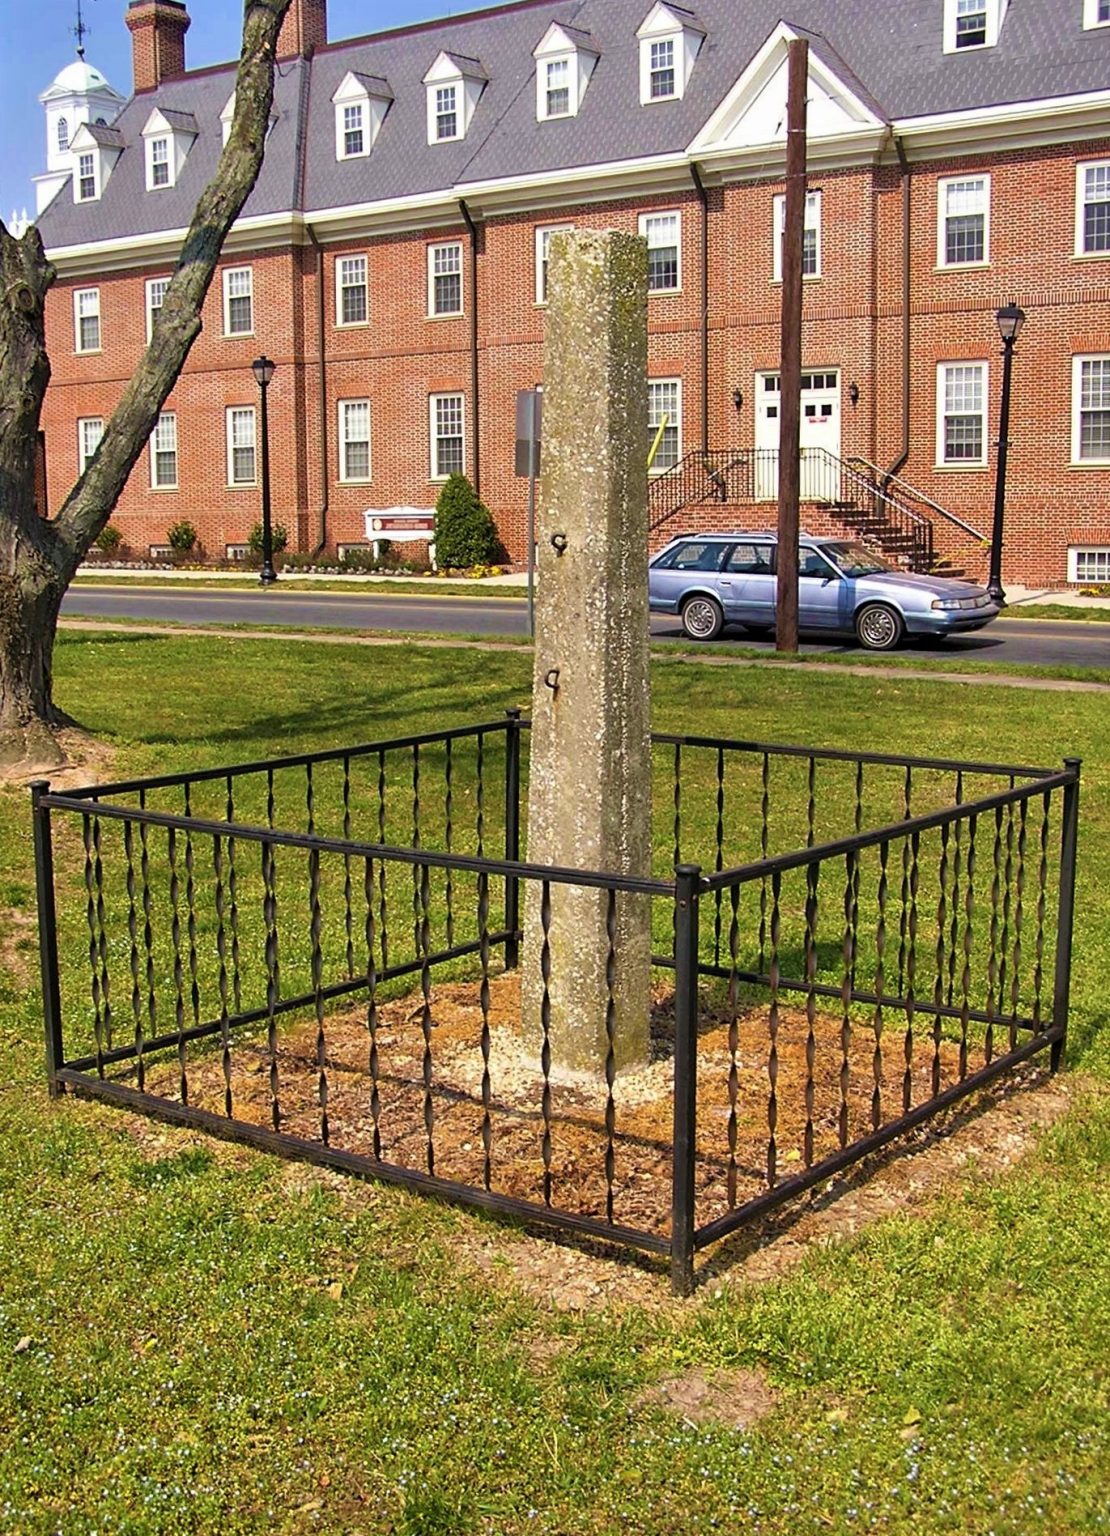 Whipping Post To Be Removed From Public Display 